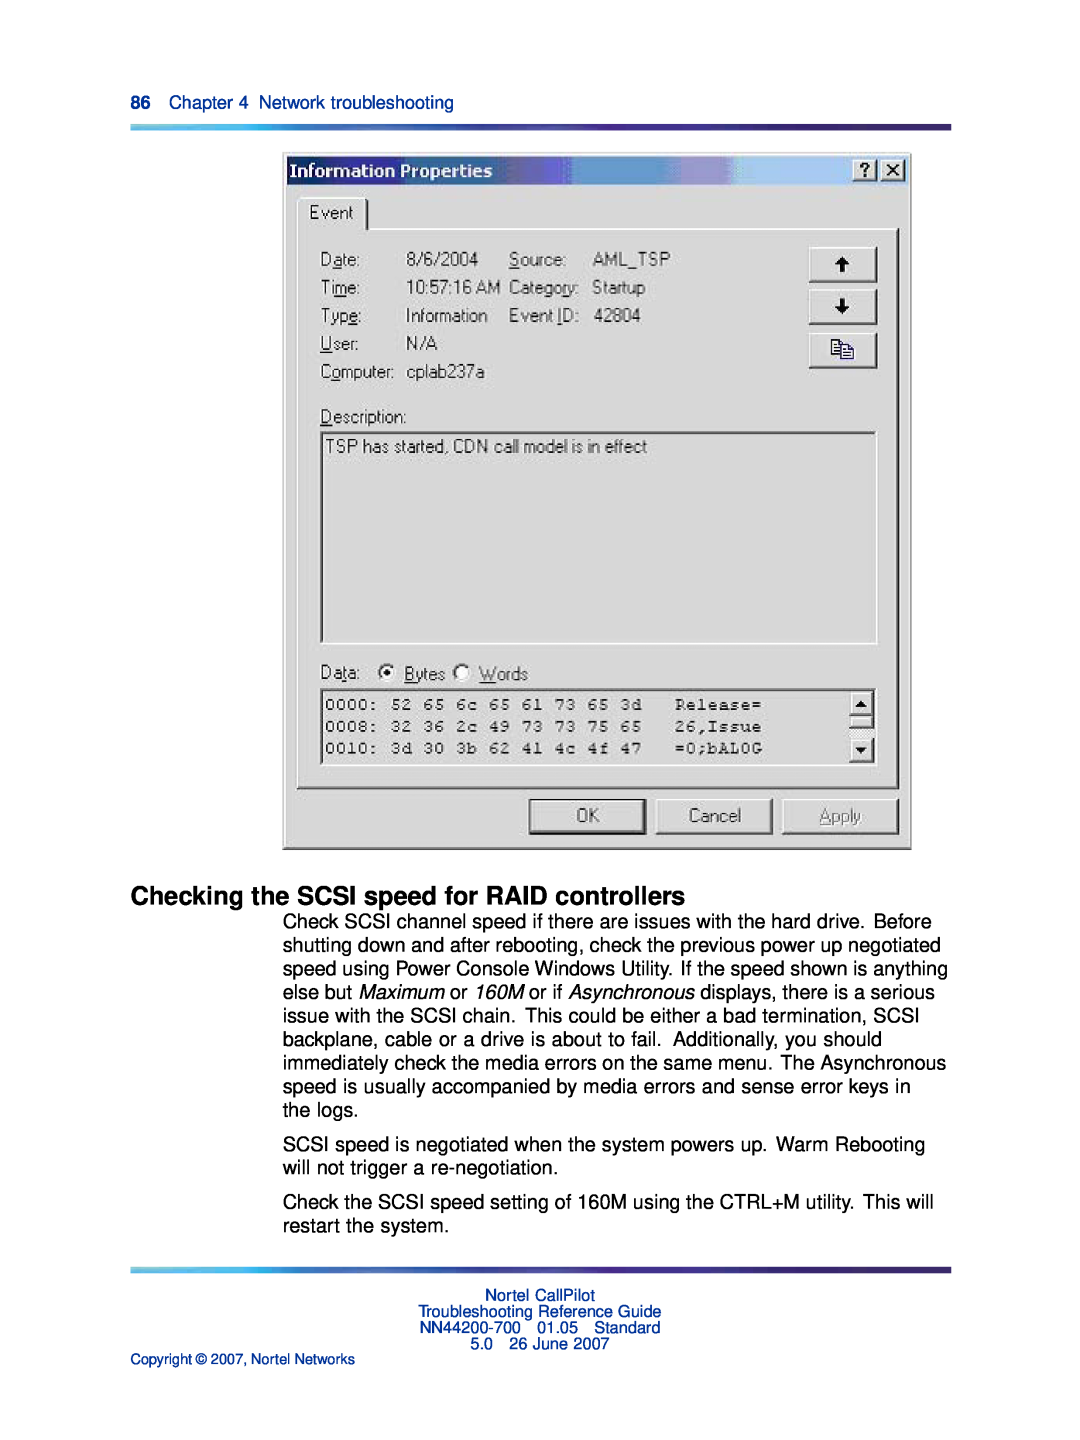 Nortel Networks NN44200-700 manual Checking the SCSI speed for RAID controllers, Network troubleshooting 